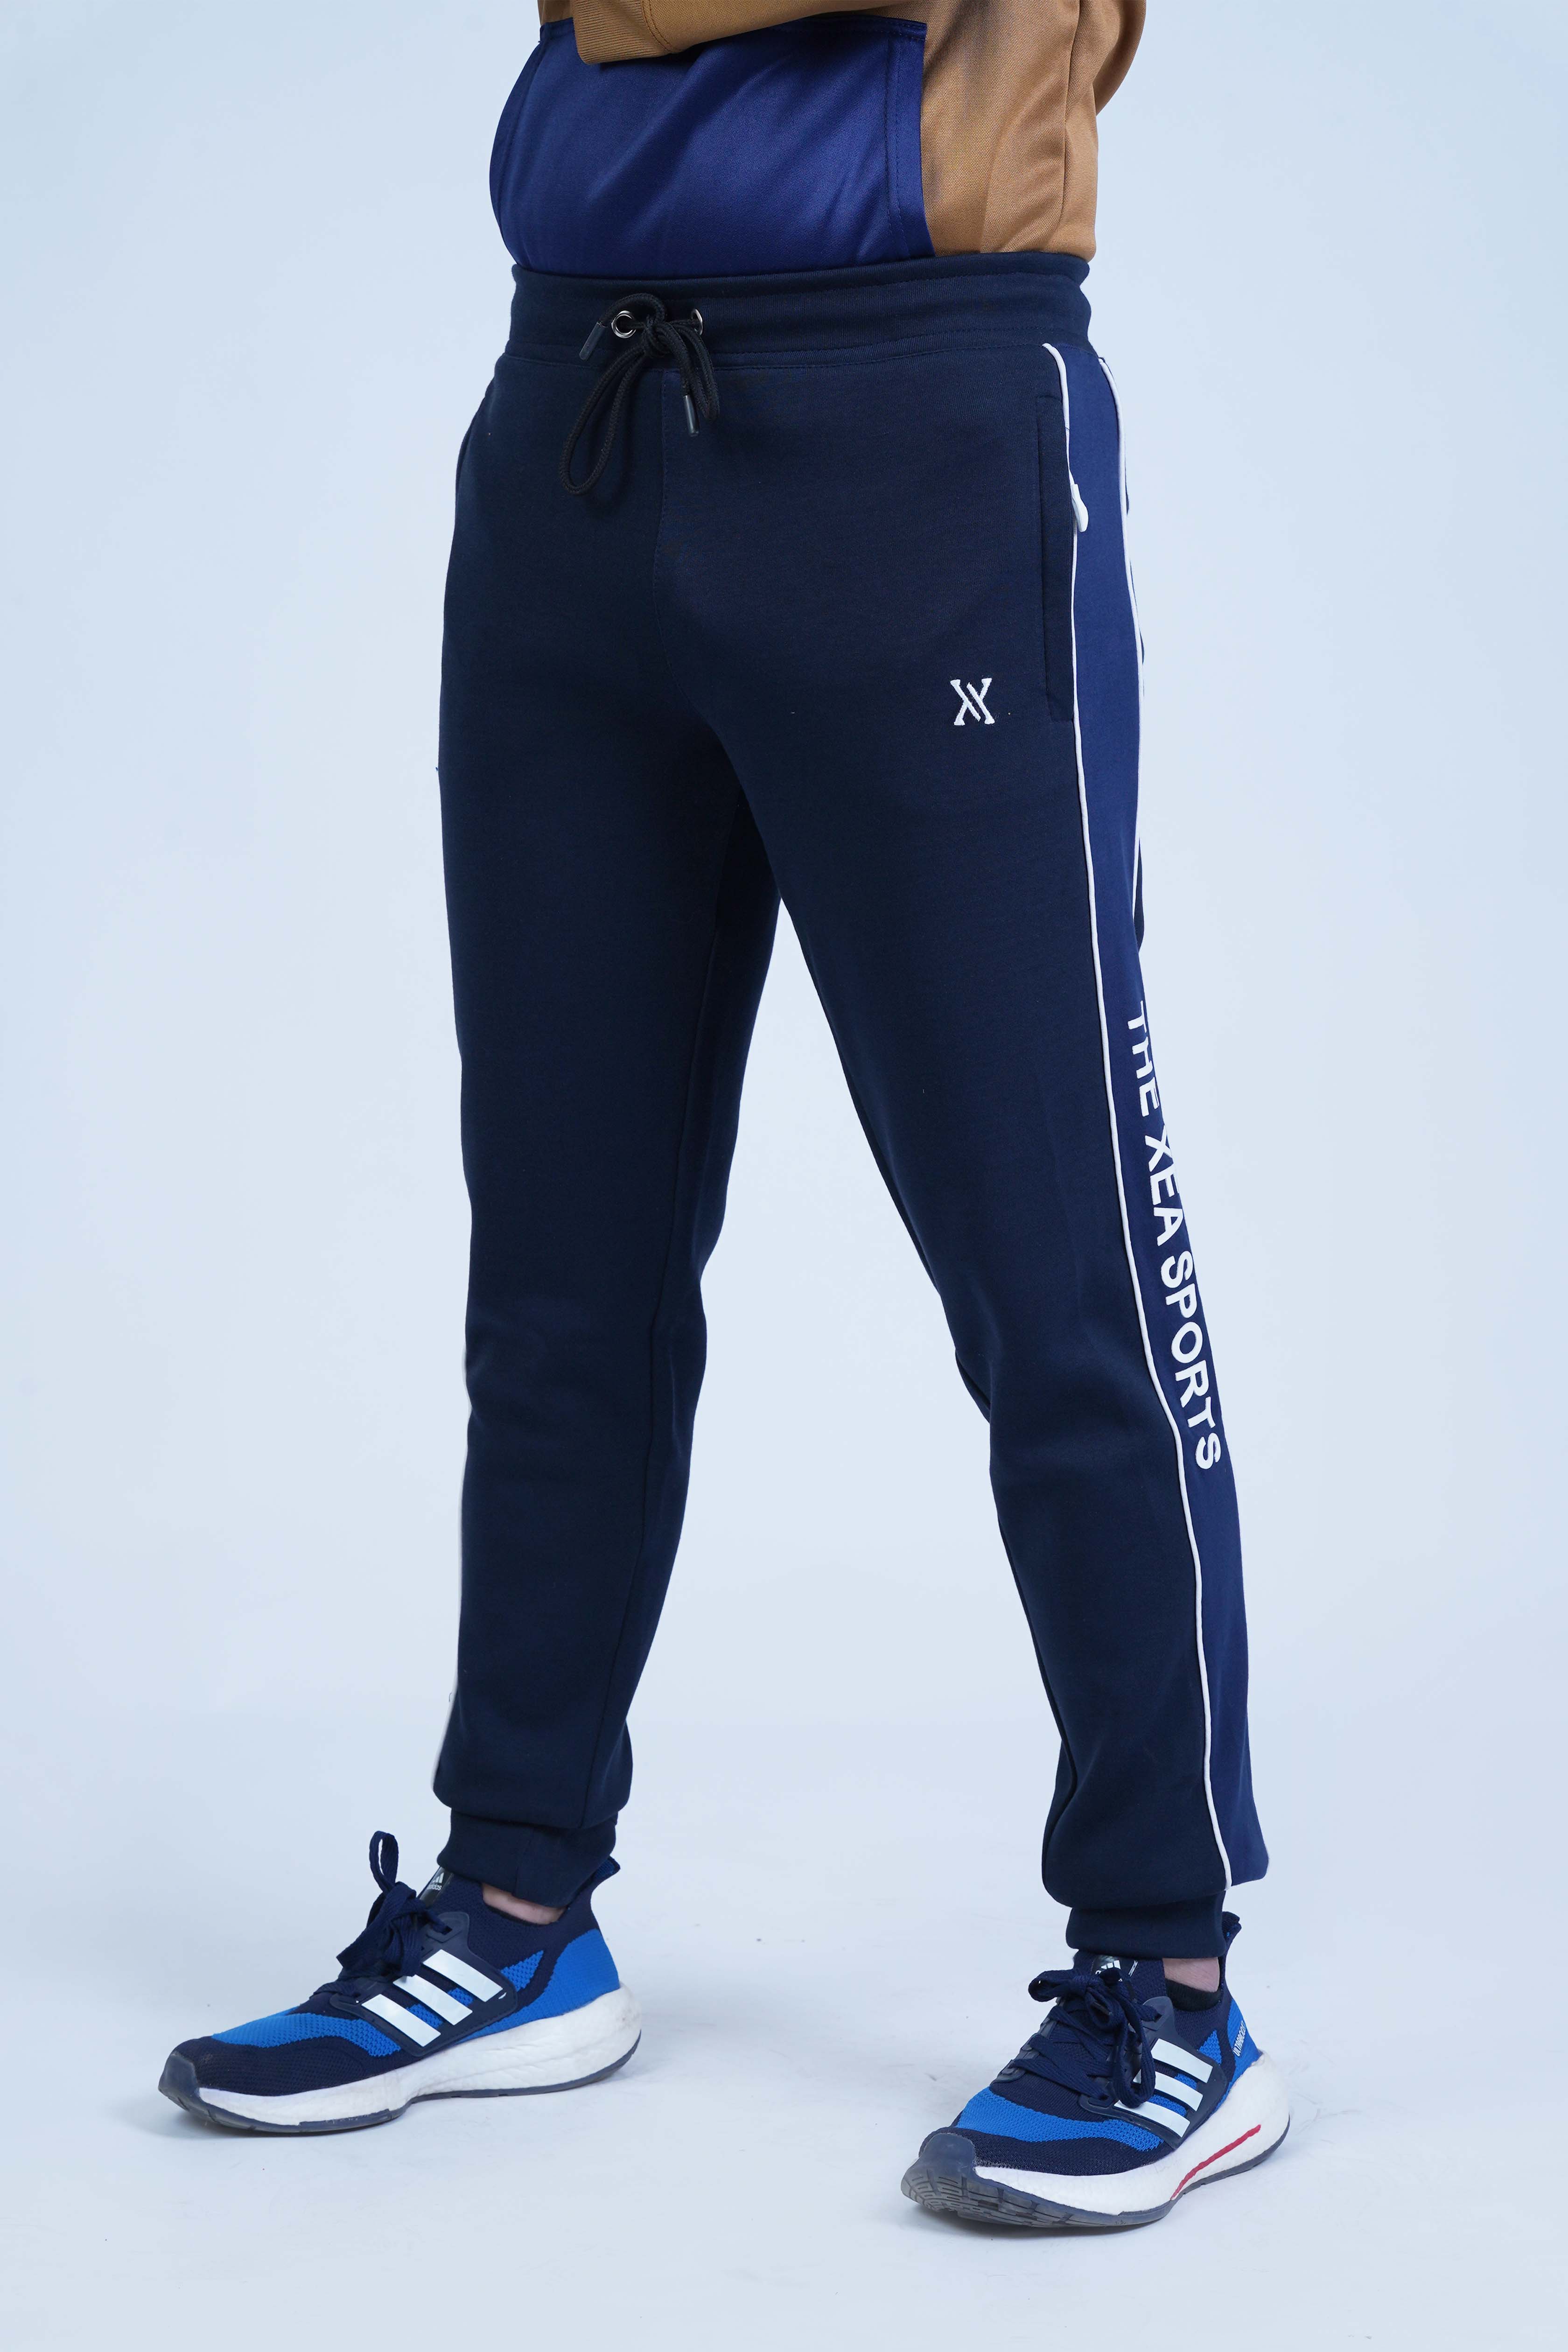 "The Xea Men's Clothing: Solid Blue Sports Trouser